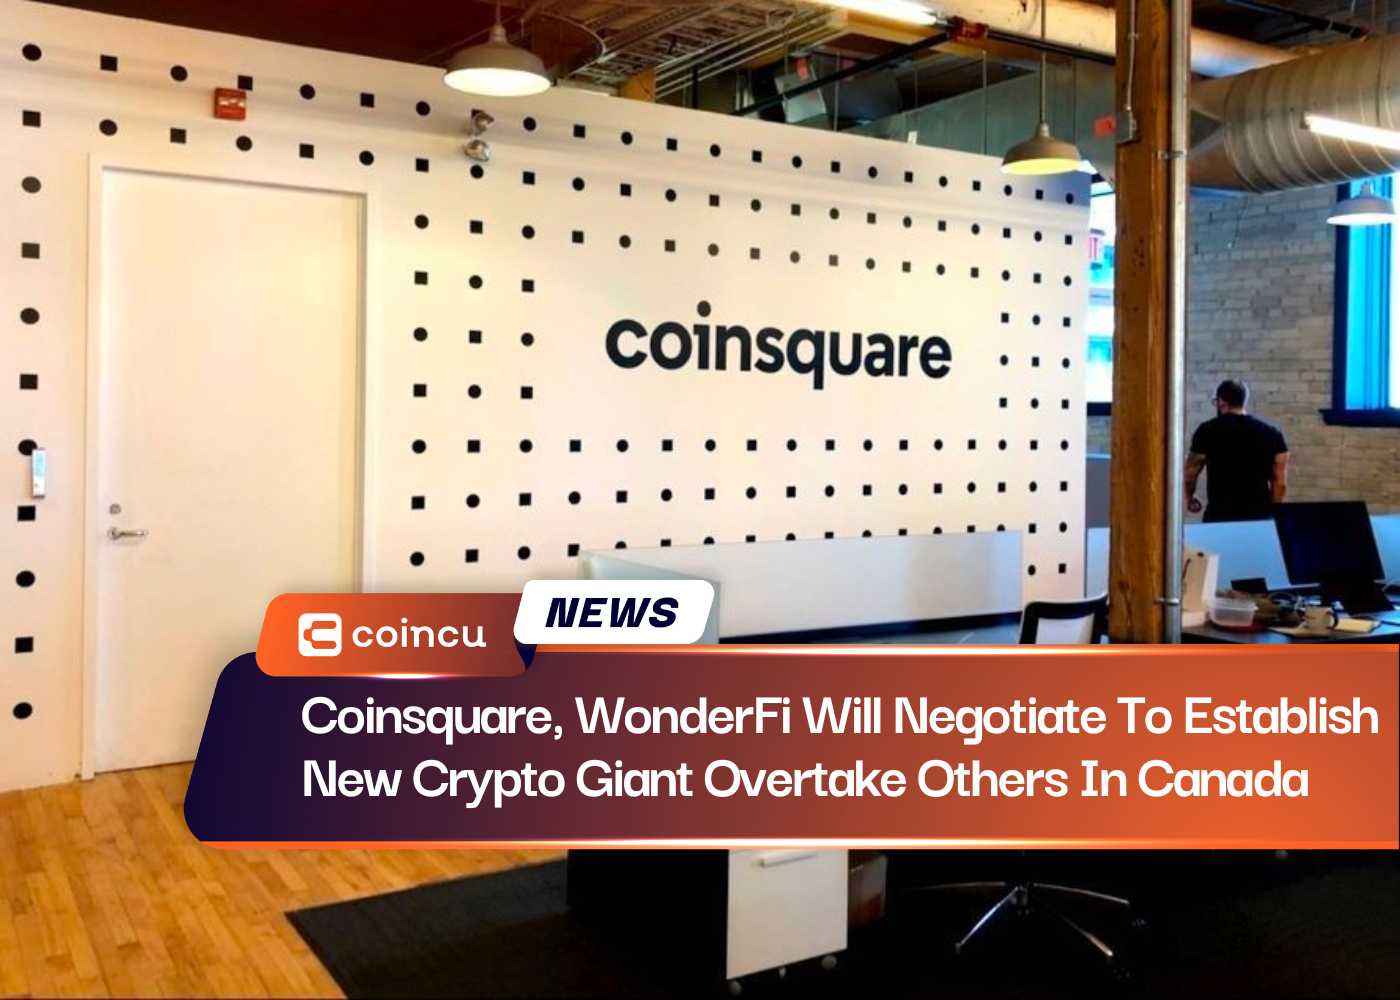 Coinsquare, WonderFi Will Negotiate To Establish New Crypto Giant Overtake Others In Canada